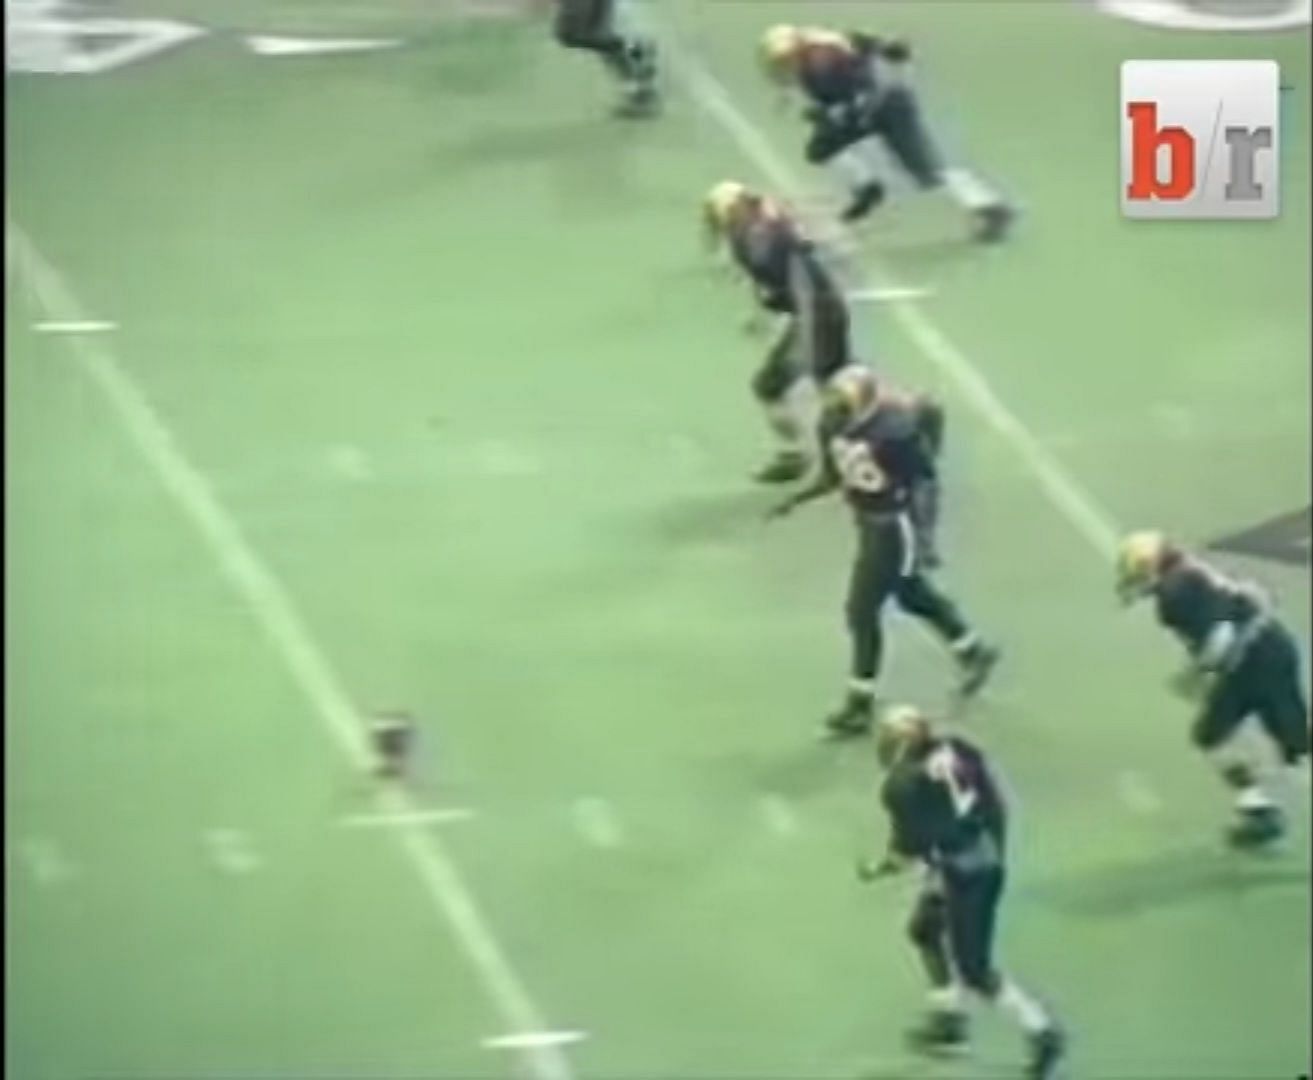 The NFL is yet to deliver three onside kicks in a game. NFL Image: Bleacher Report YouTube